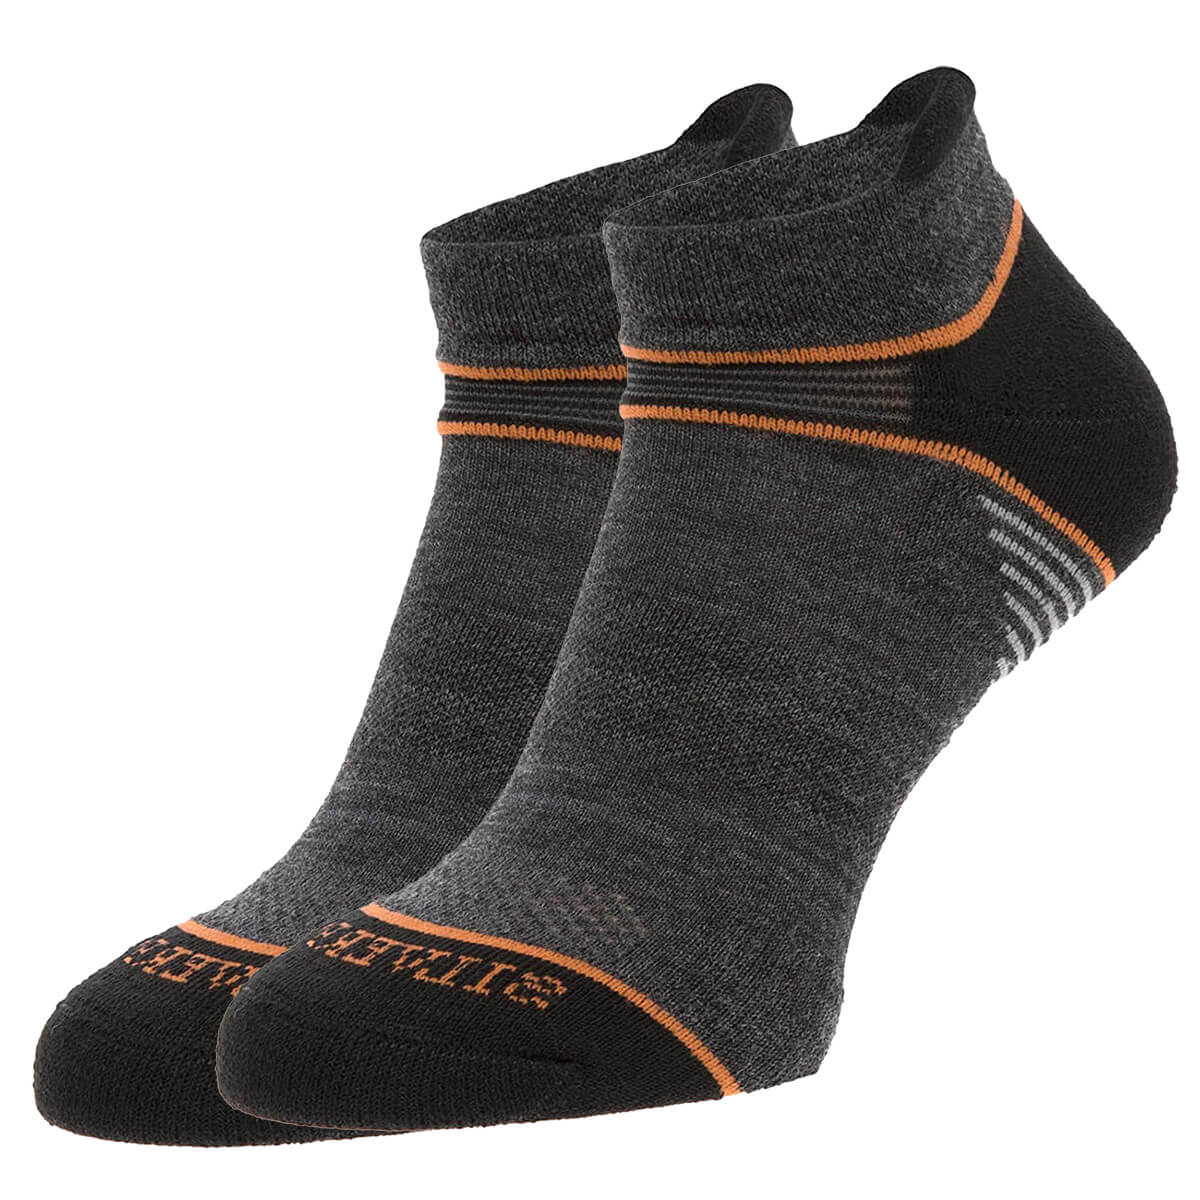 Silverpoint On the Move Merino Wool Ankle Socks - John Bull Clothing